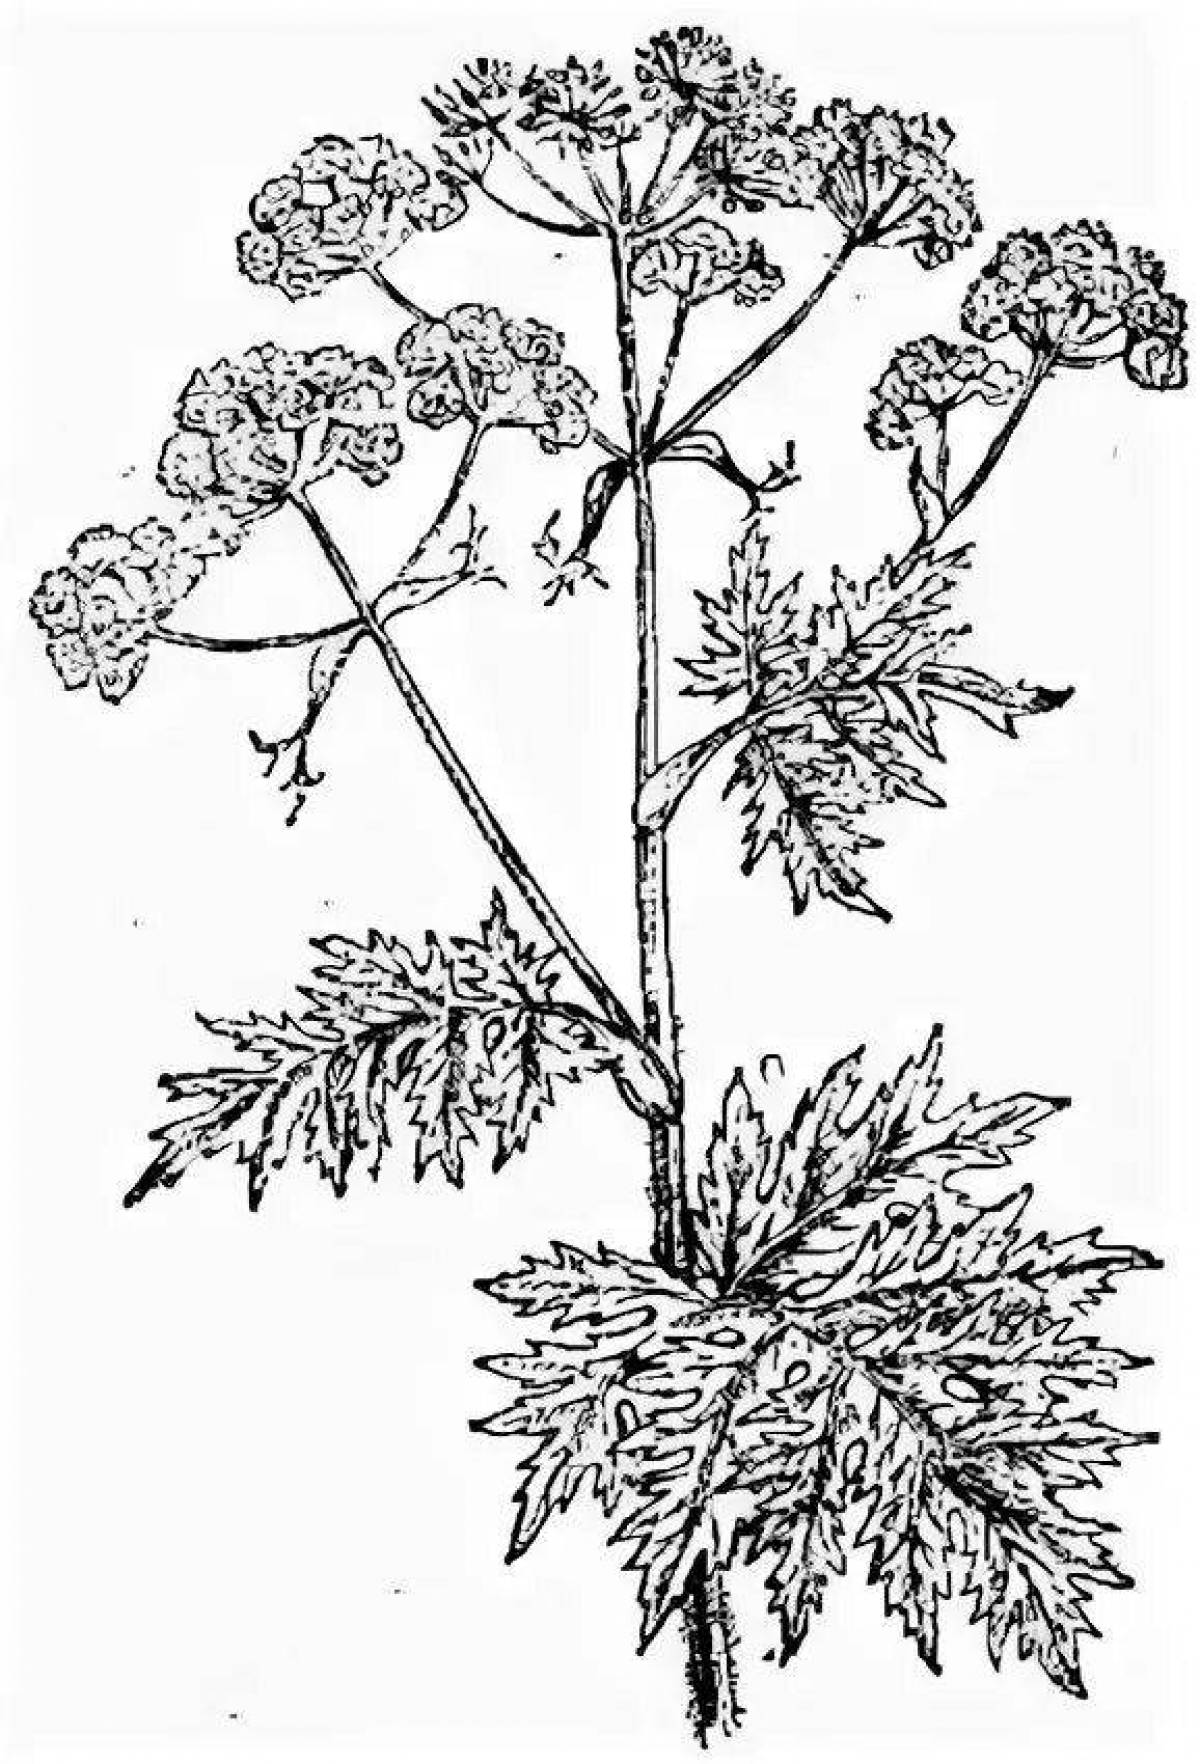 Coloring book sparkling hogweed